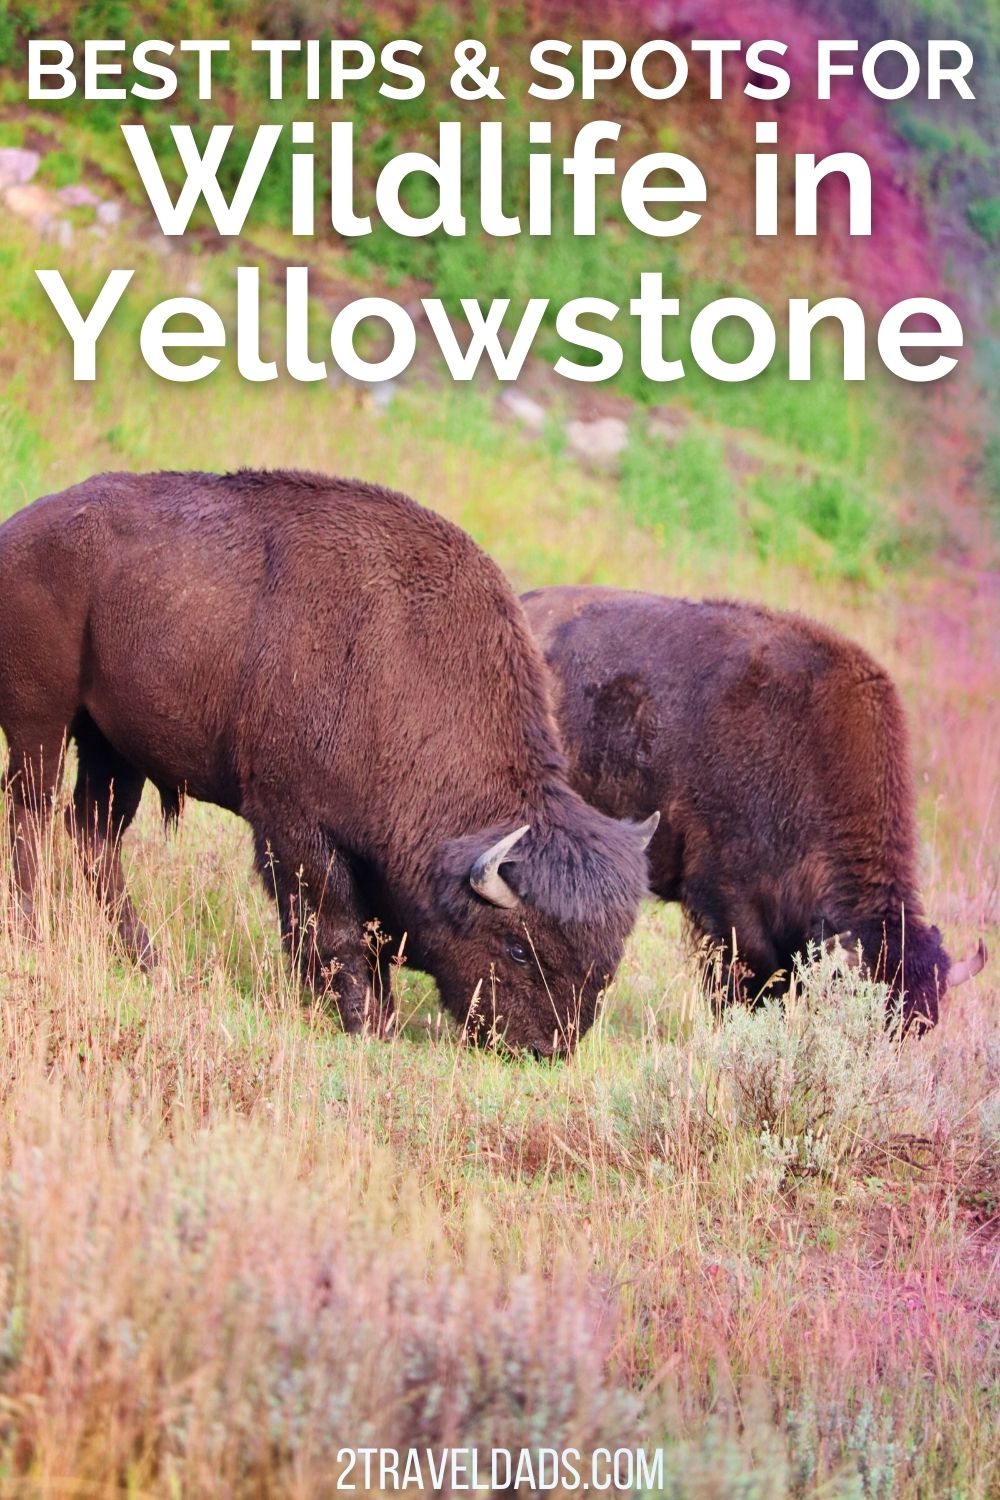 Wildlife in Yellowstone National Park is one of the highlights of visiting. This guide includes the best places to see all sorts of wildlife in Yellowstone, and tips for easy sightings.